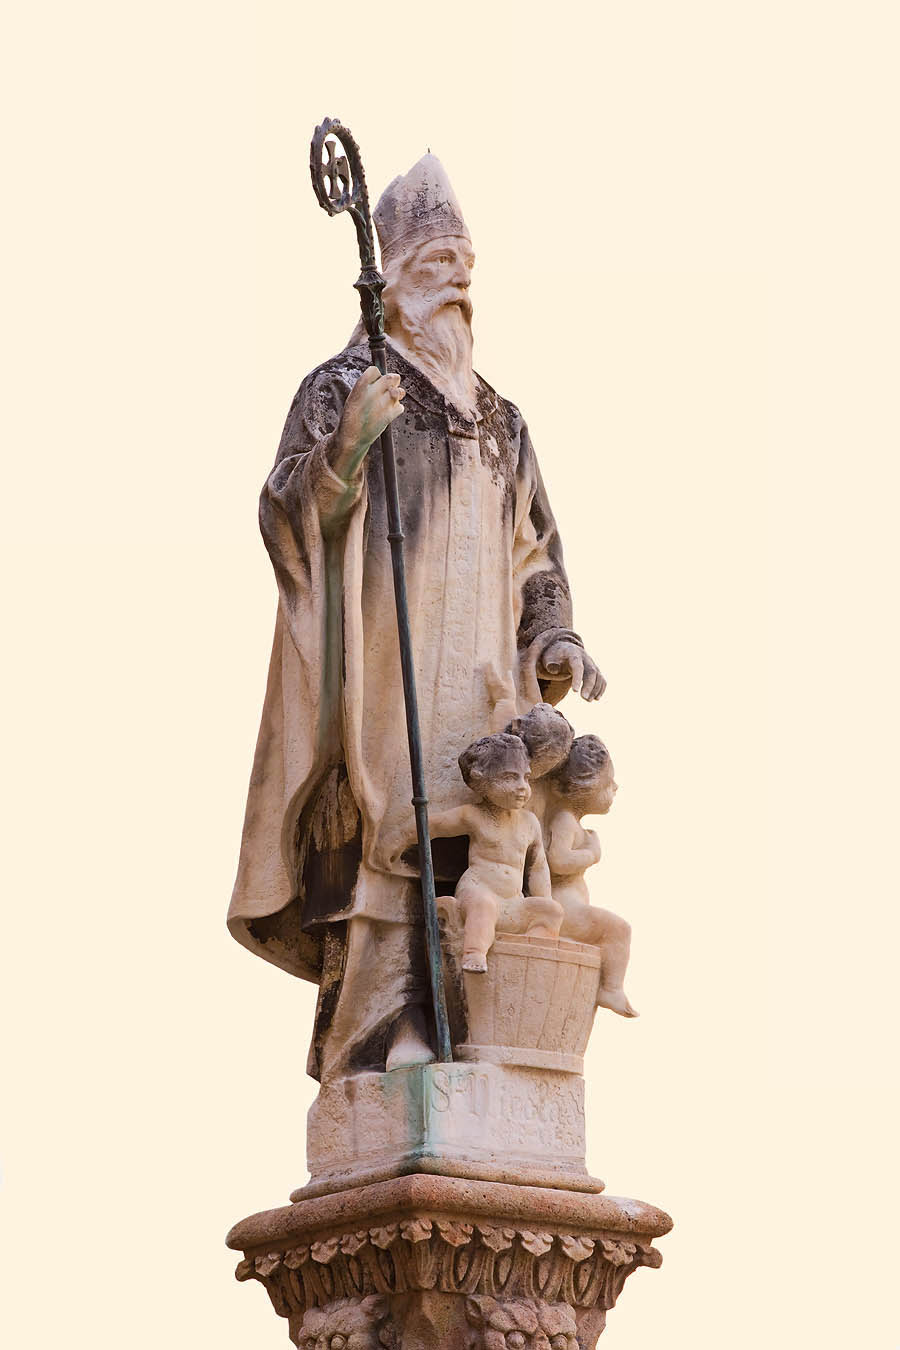 Bassignani’s work, the statue of St. Nicholas, patron of seamen and children, and of Monaco along with St. Devota, surmounts the fountain of the square which holds the same name in Monaco-Ville.